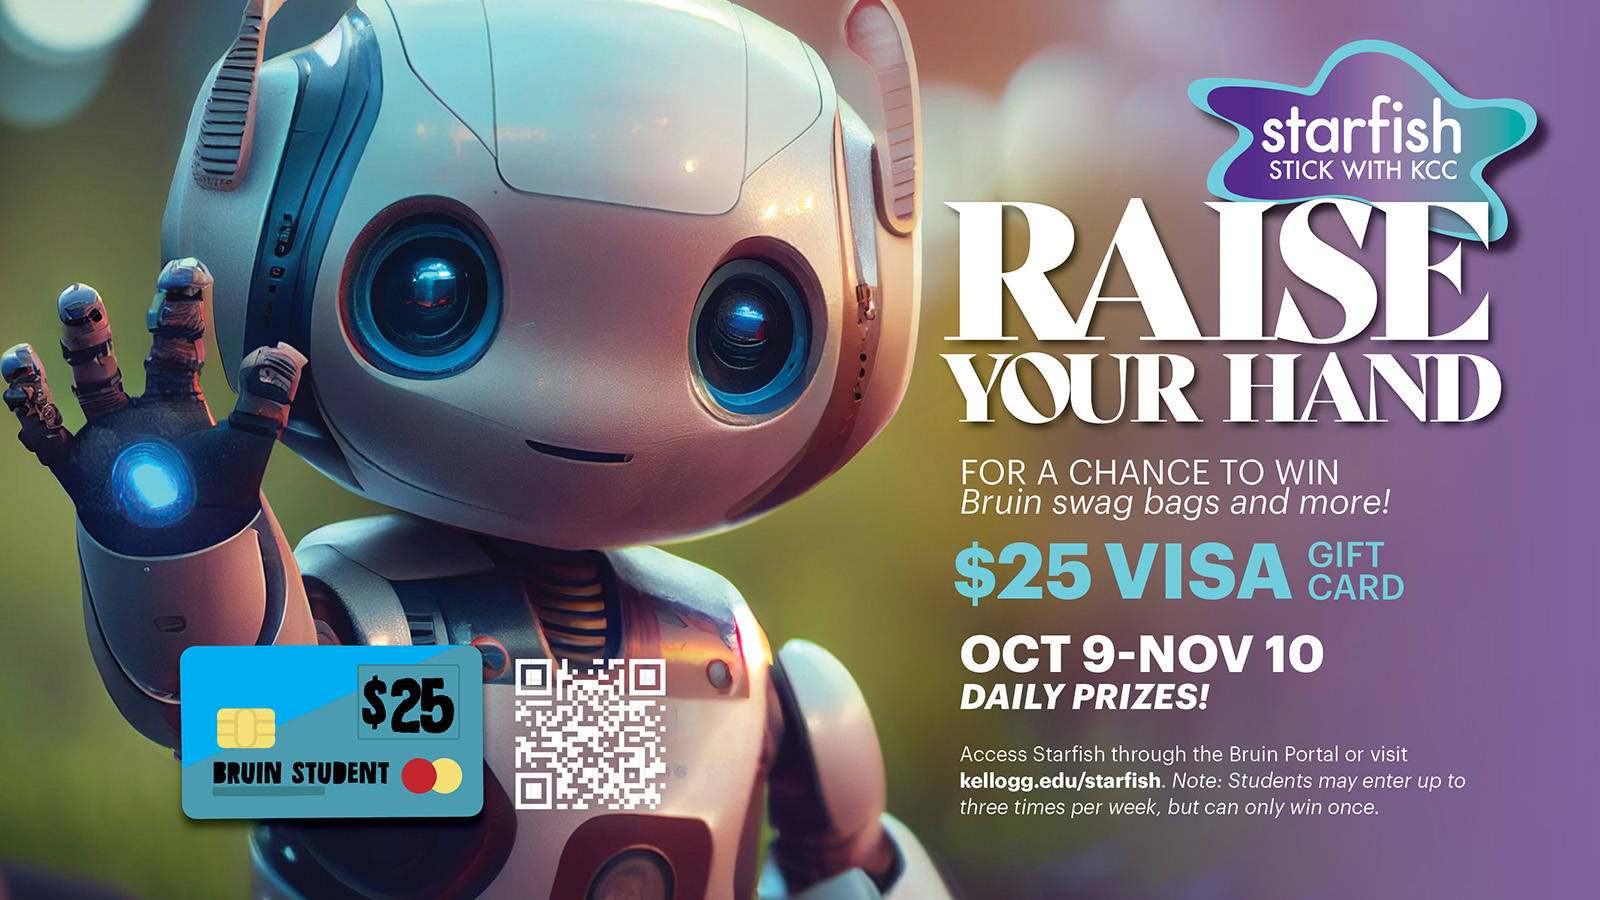 Illustration of a robot raising its hand on a text slide that reads, "Raise your hand for a chance to win Bruin swag bags and more! $25 Visa gift card. Oct. 9-Nov. 10. Daily prizes! Access Starfish through the Bruin Portal or visit kellogg.edu/starfish. Note: Students may enter up to three times per week, but can only win once."